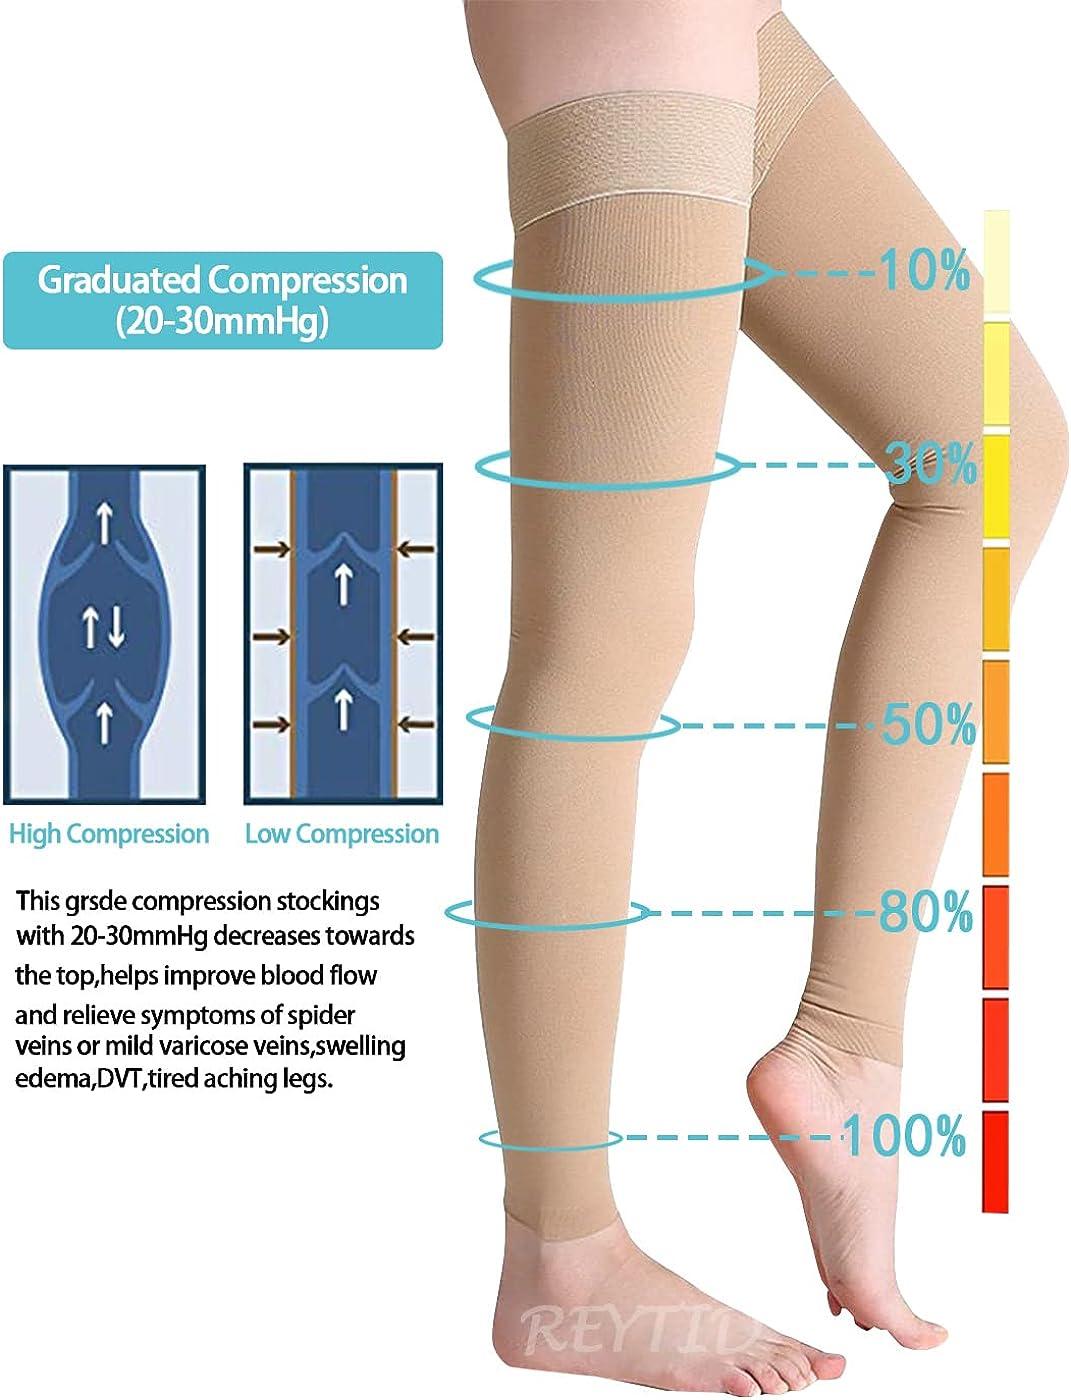 Thigh High Compression Stocking Footless, 20-30mmHg Compression Socks with  Silicone Band, Varicose Veins 